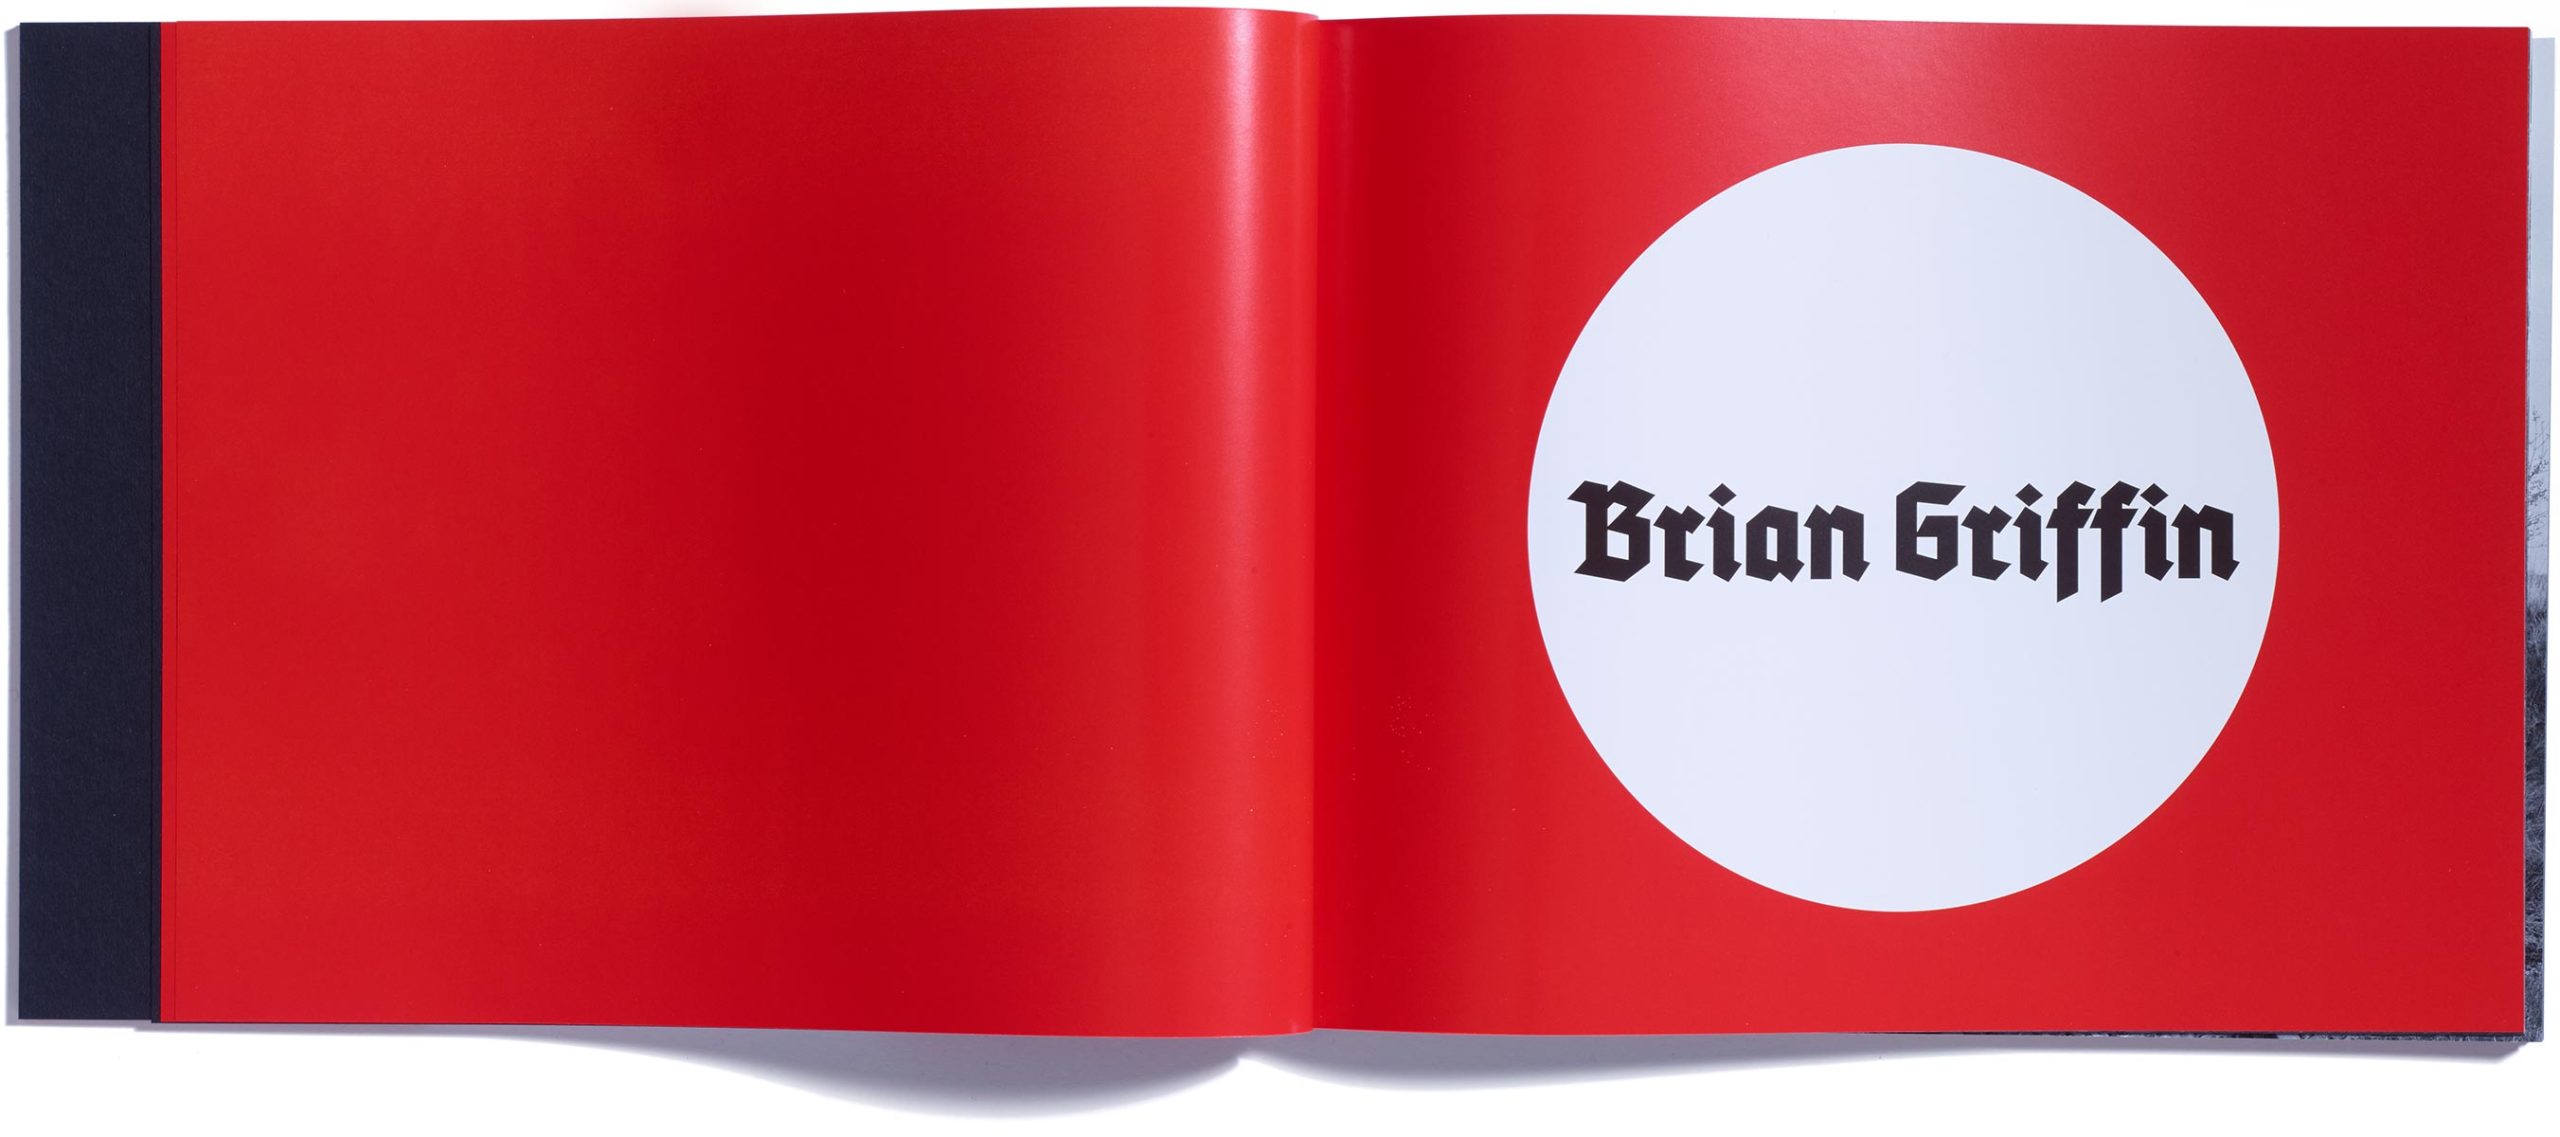 Browns Editions, Browns Editions Publishing, Browns Editions Books, Browns Editions Brian Griffin, Browns Editions Himmelstrasse, Browns Editions Brian Griffin Himmelstrasse